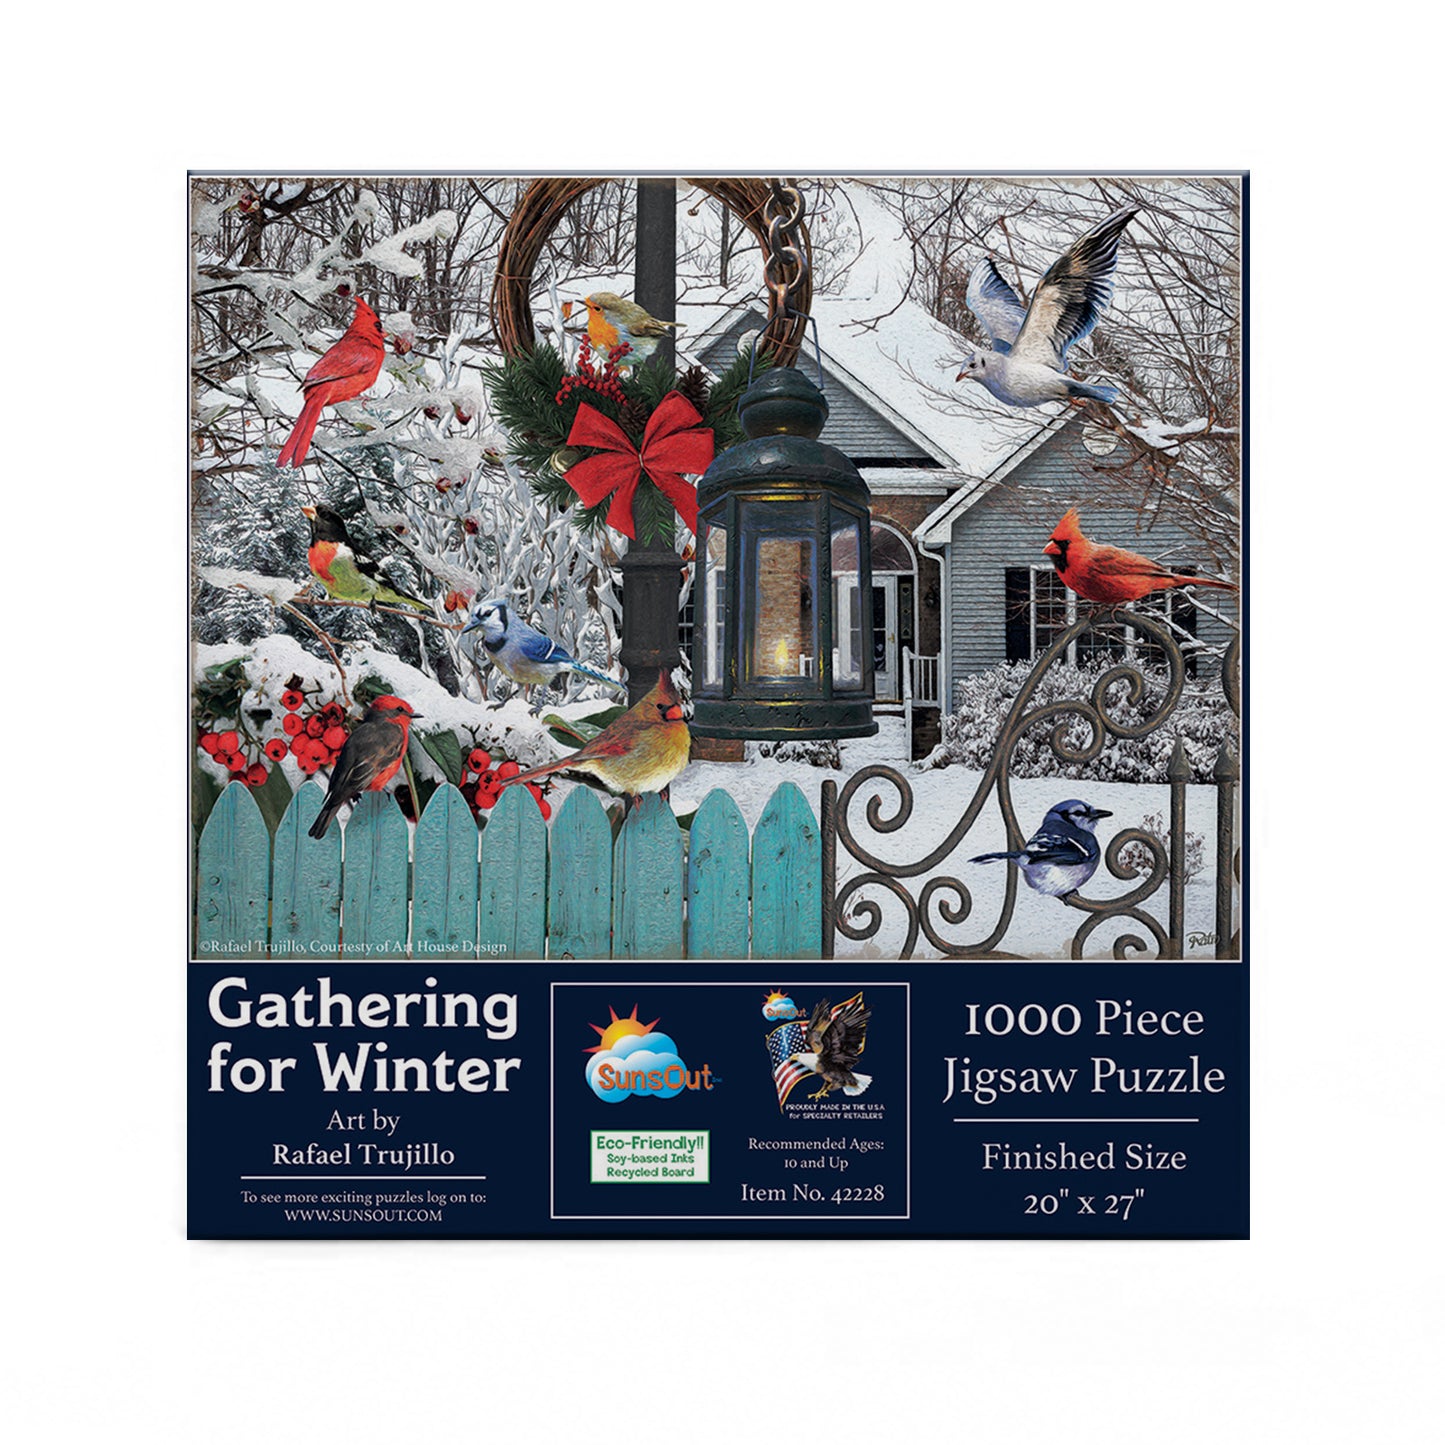 Gathering for Winter - 1000 Piece Jigsaw Puzzle